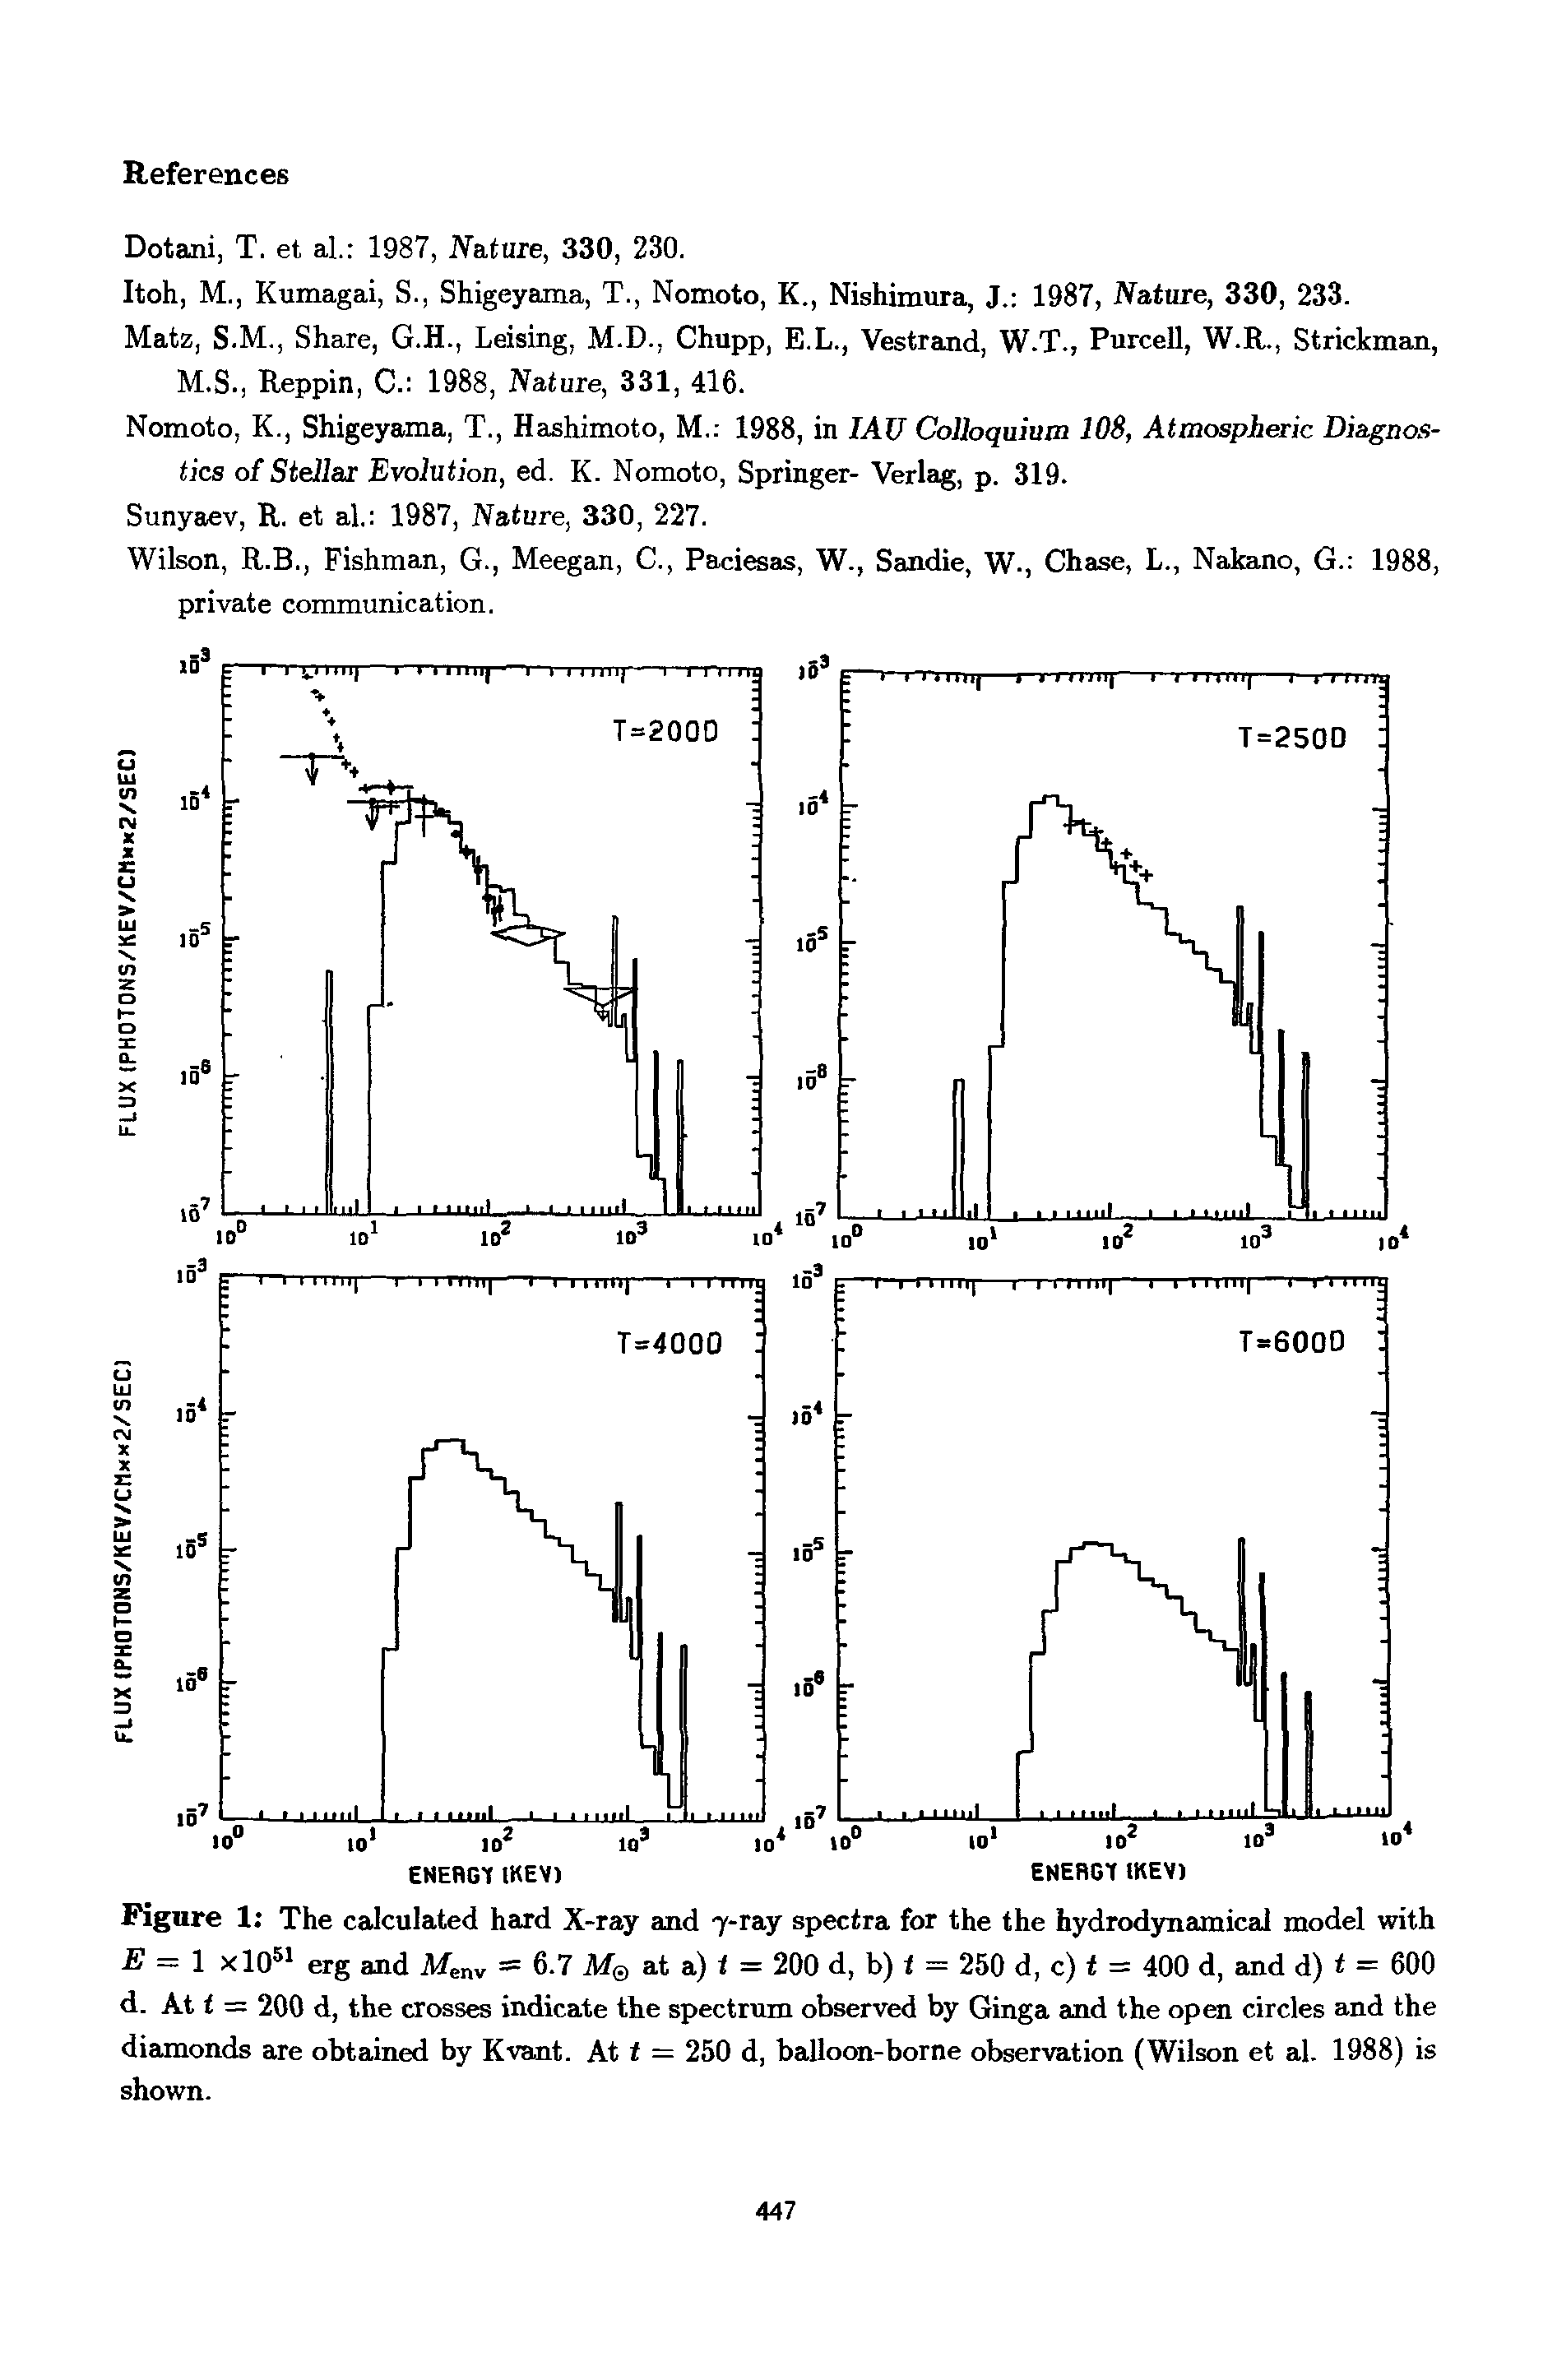 Figure 1 The calculated hard X-ray and 7-ray spectra for the the hydrodynamical model with E = 1 xlO51 erg and Menv = 6.7 M0 at a) t = 200 d, b) i = 250 d, c) t = 400 d, and d) t = 600 d. At t = 200 d, the crosses indicate the spectrum observed by Ginga and the open circles and the diamonds are obtained by Kvant. At t = 250 d, balloon-borne observation (Wilson et al. 1988) is shown.